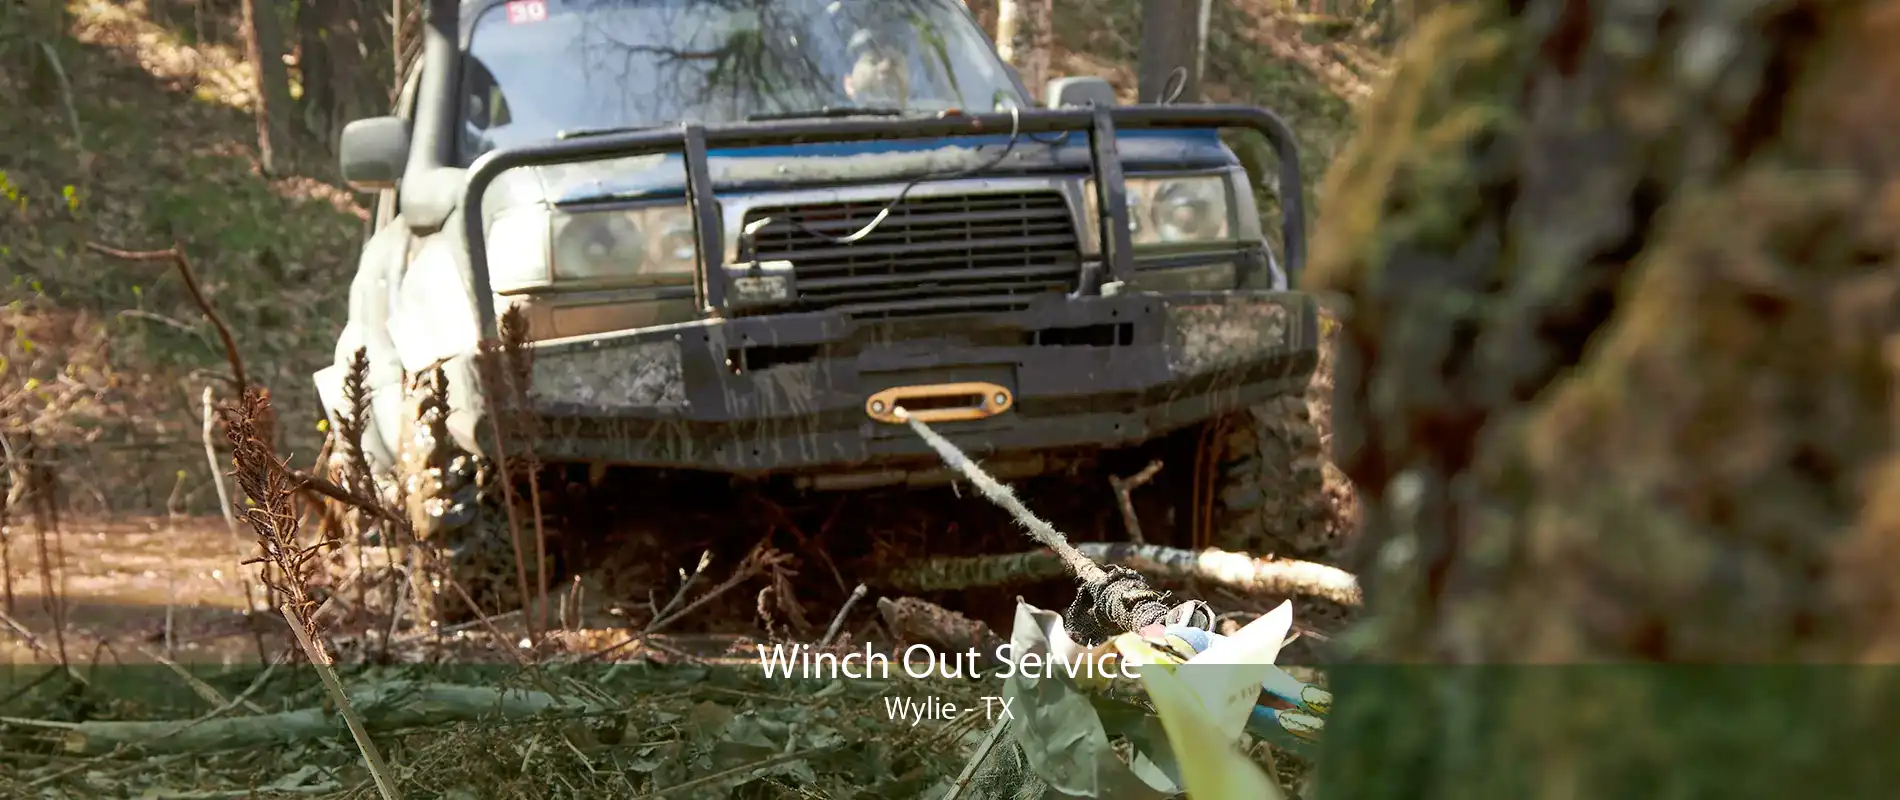 Winch Out Service Wylie - TX